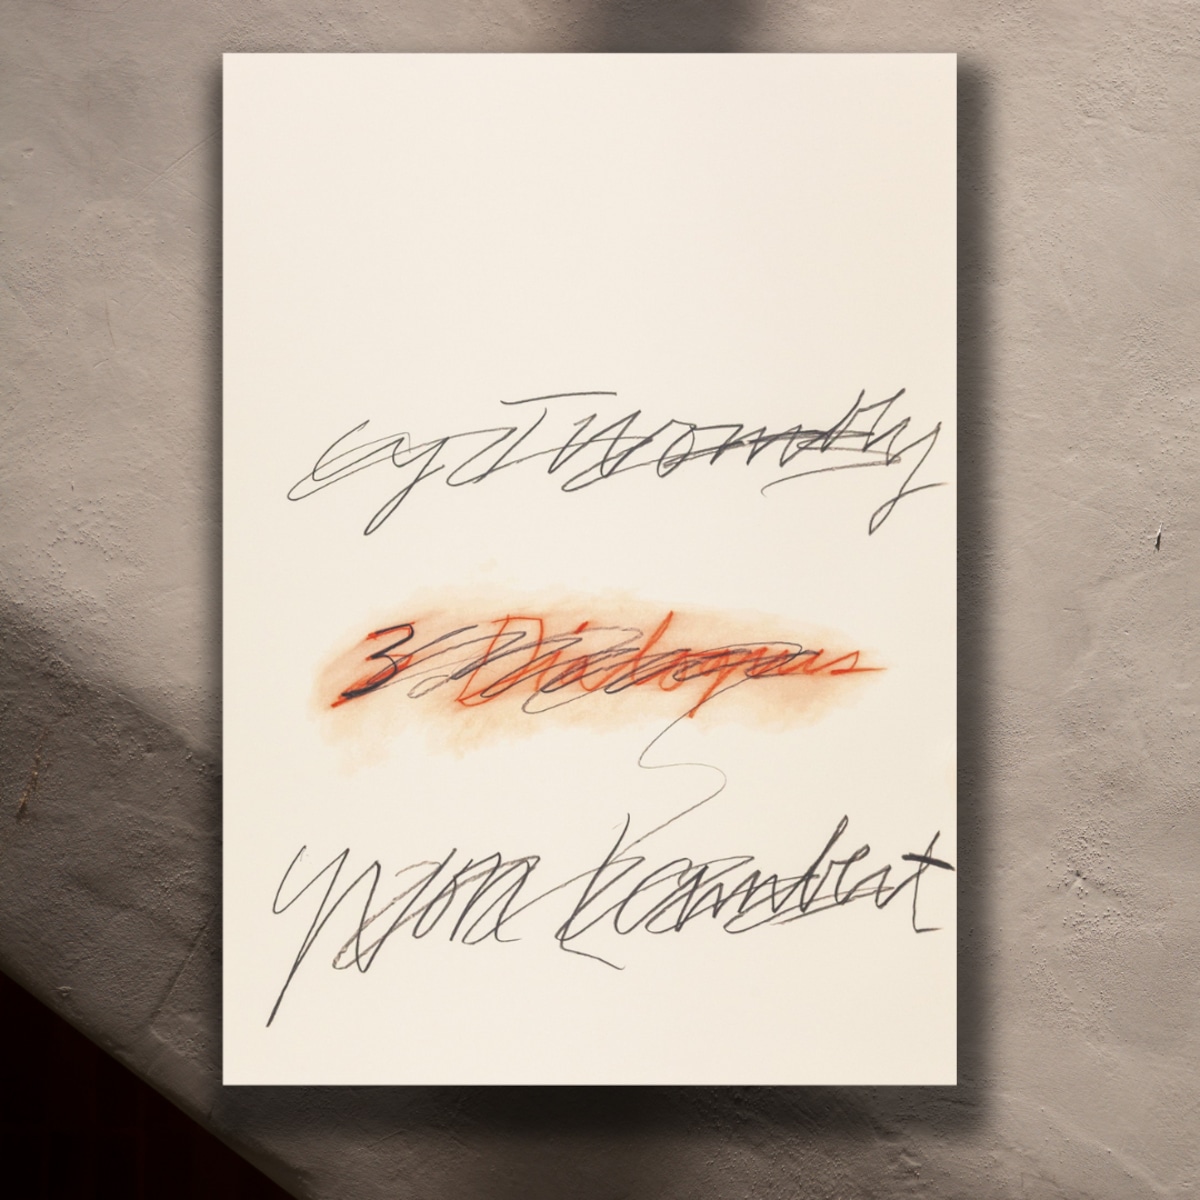 Cy Twombly - Three Dialogues (2) 1977 希少ポスター | 東京古着日和